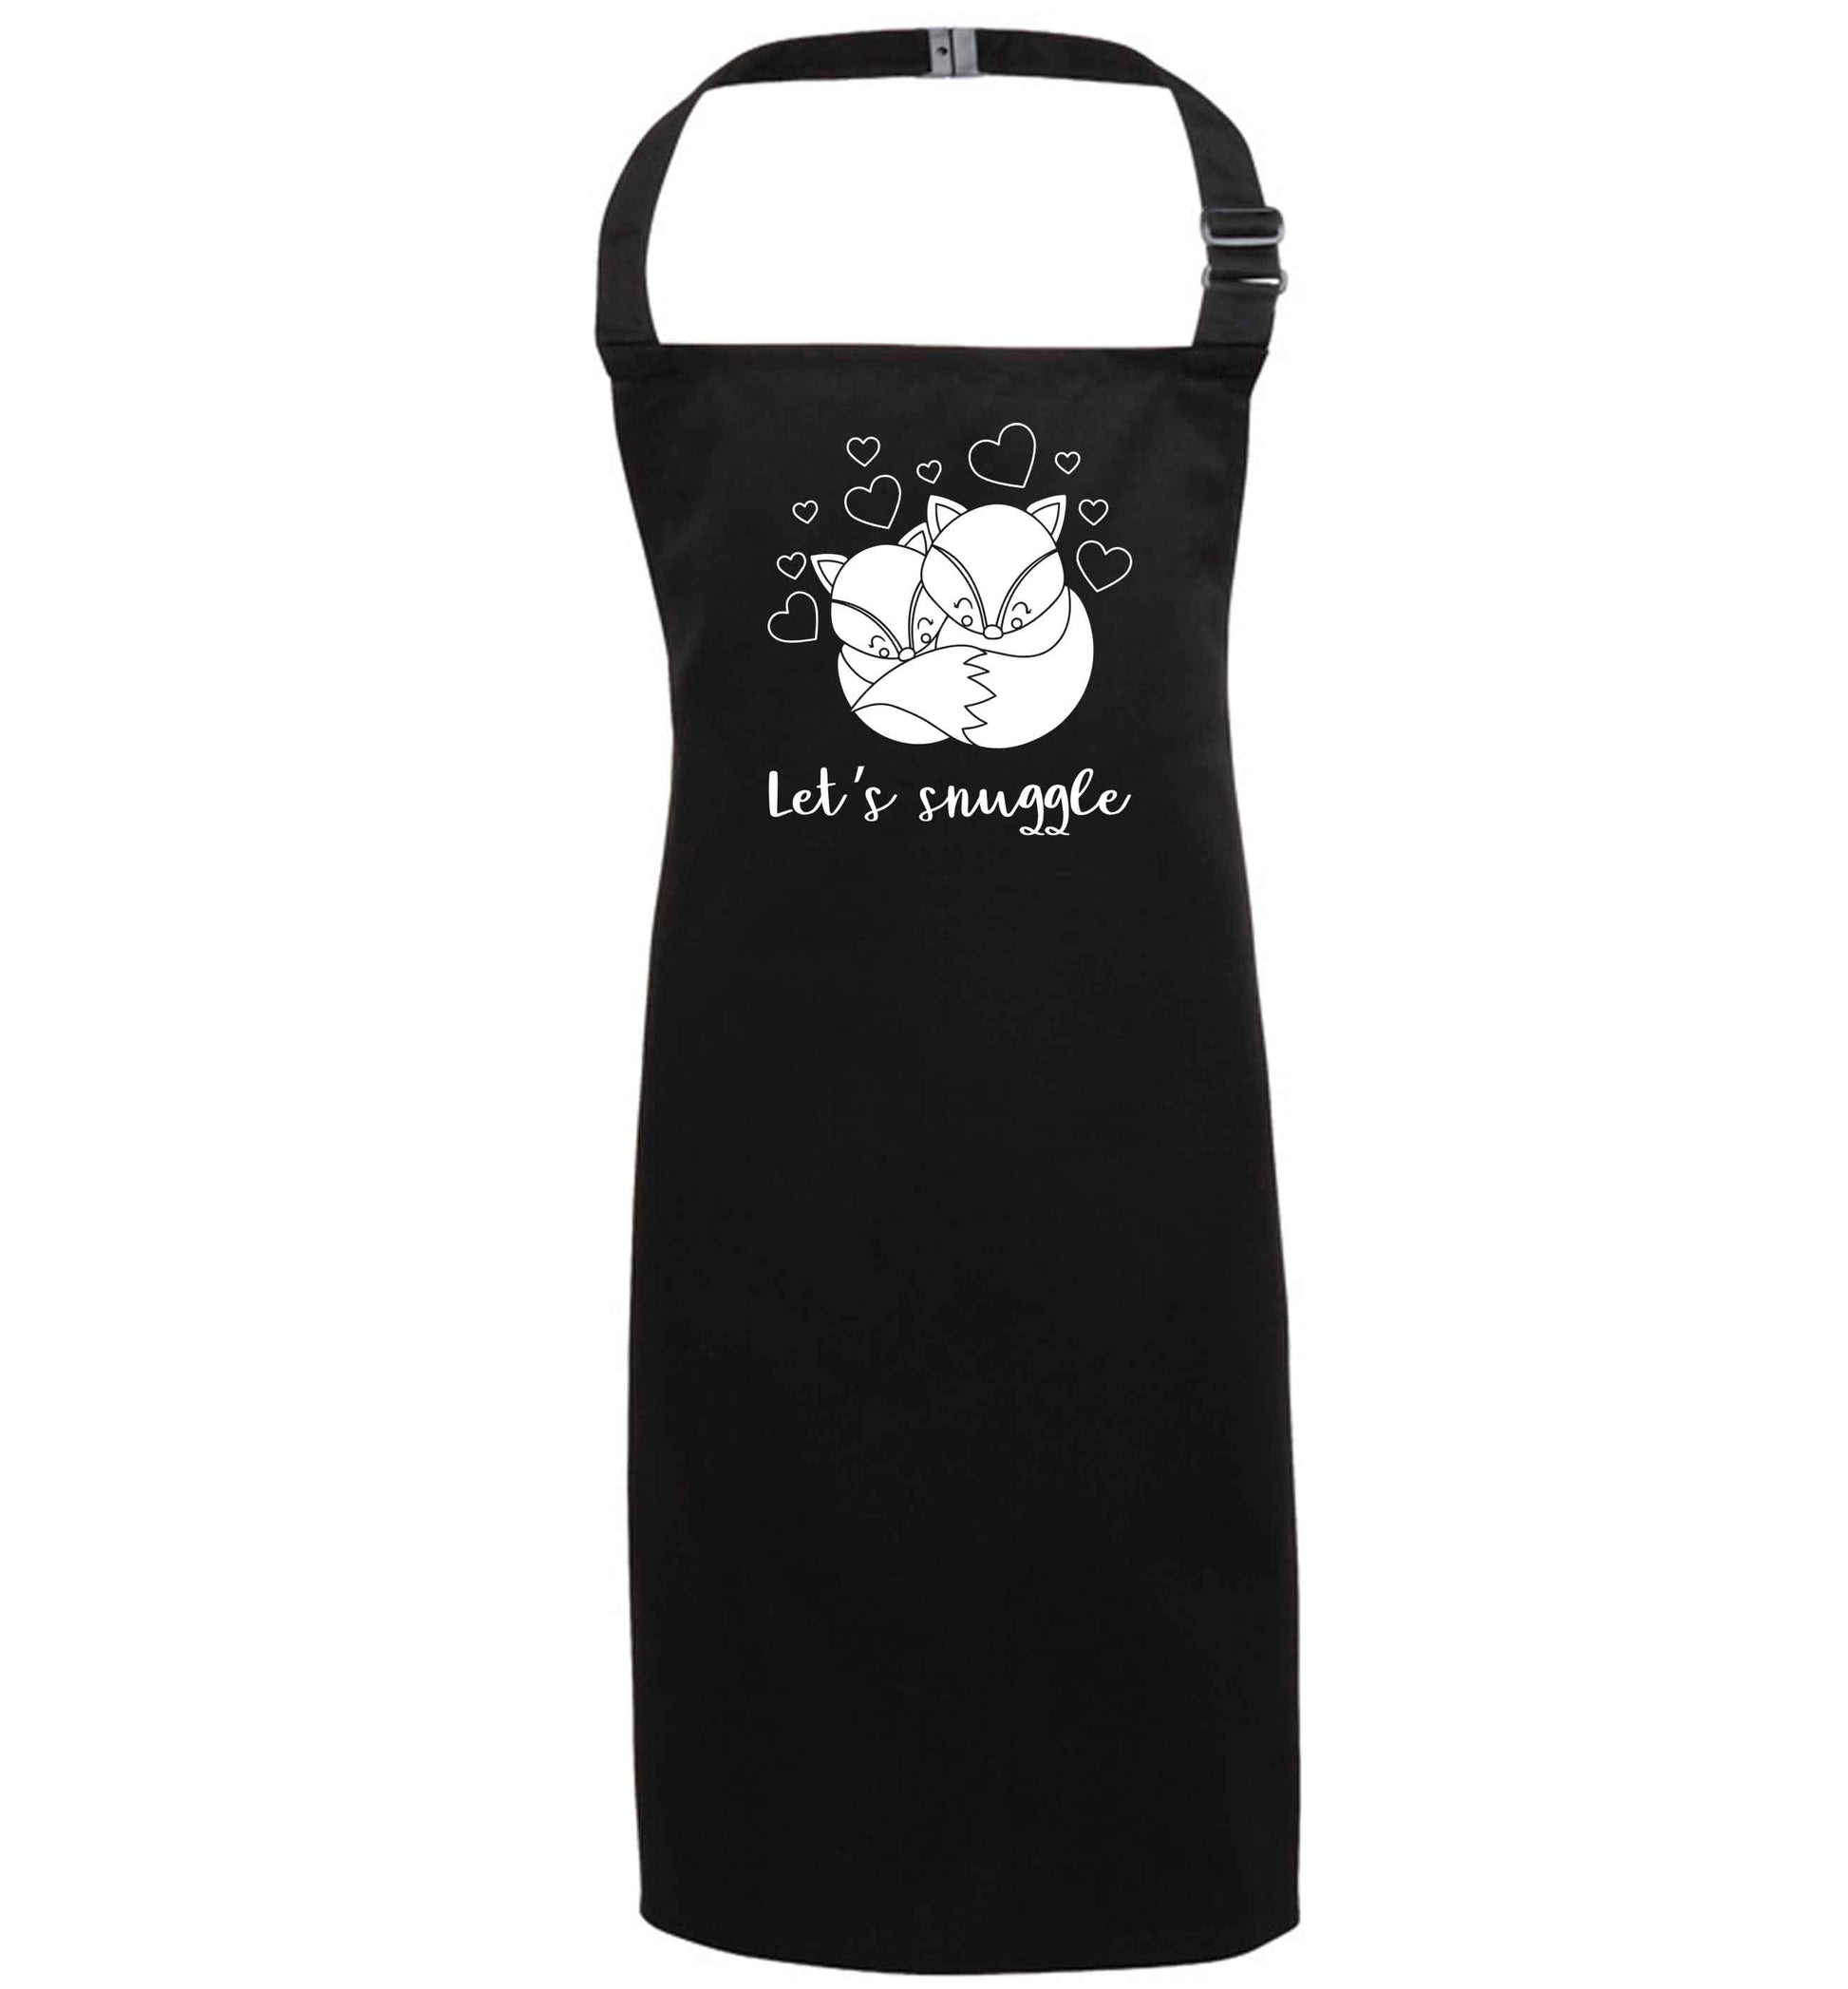 Let's snuggle black apron 7-10 years